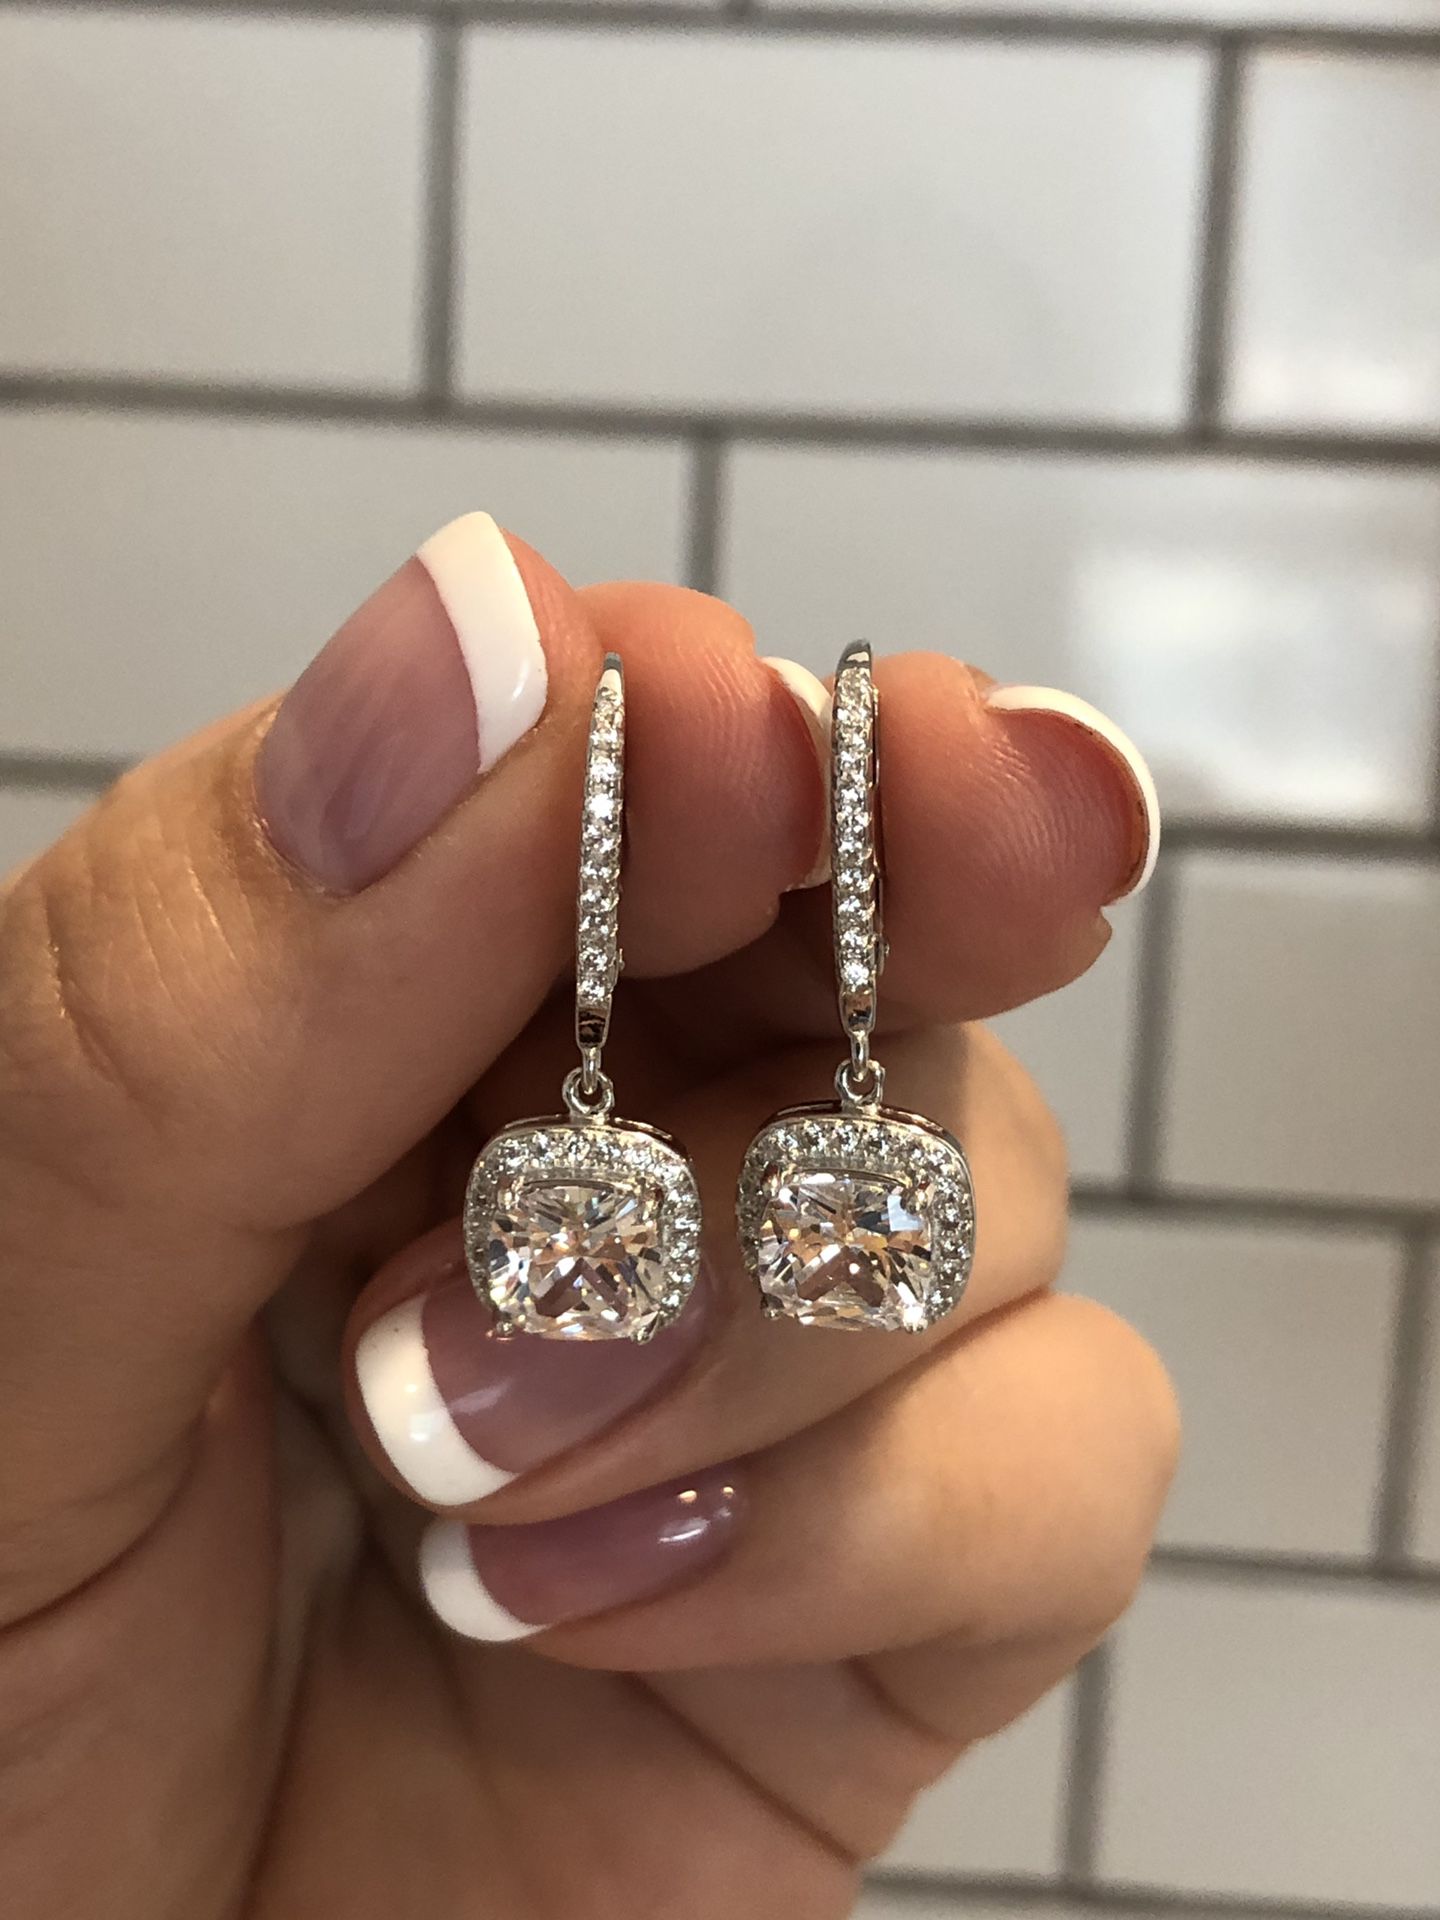 Brand New Stunning Sterling Silver 925 Earrings With CZ Diamonds